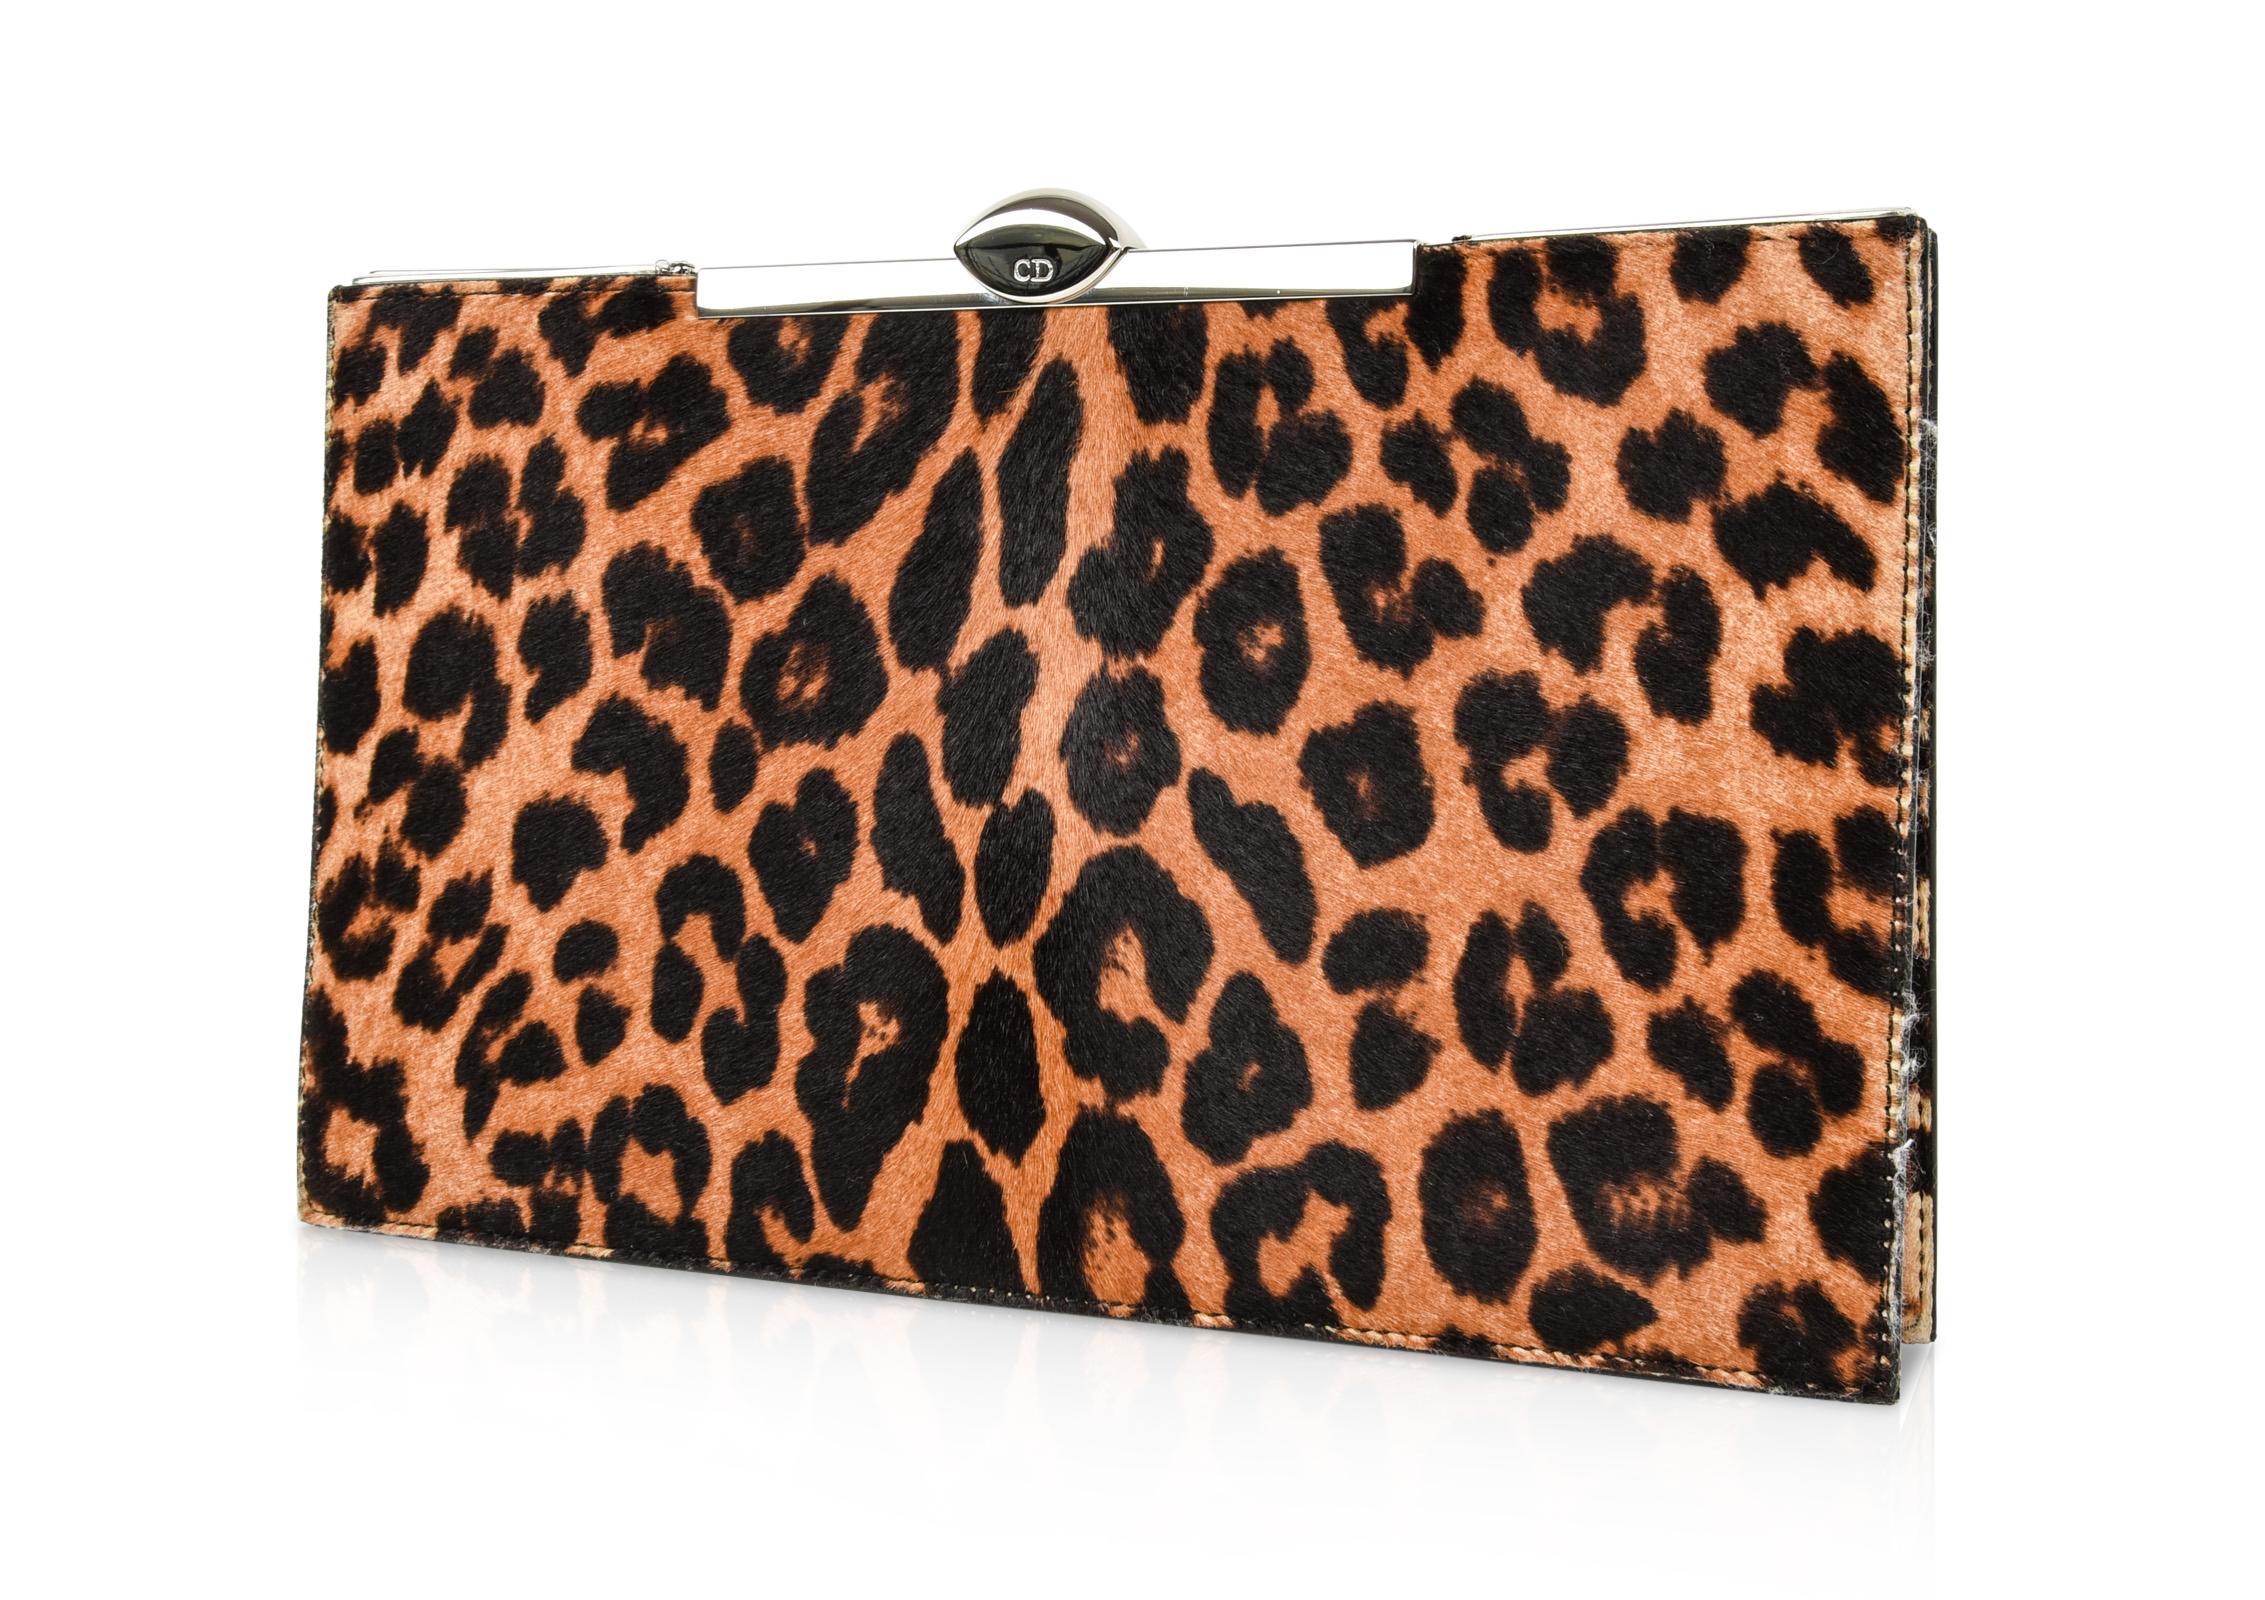 Guaranteed authentic Christian Dior leopard print pony clutch frame bag with silver toned hardware.
Slim and sophisticated with unique opening.
Top closure is domed with CD embossed.  
Small interior pocket has silver hardware detail with a mirror